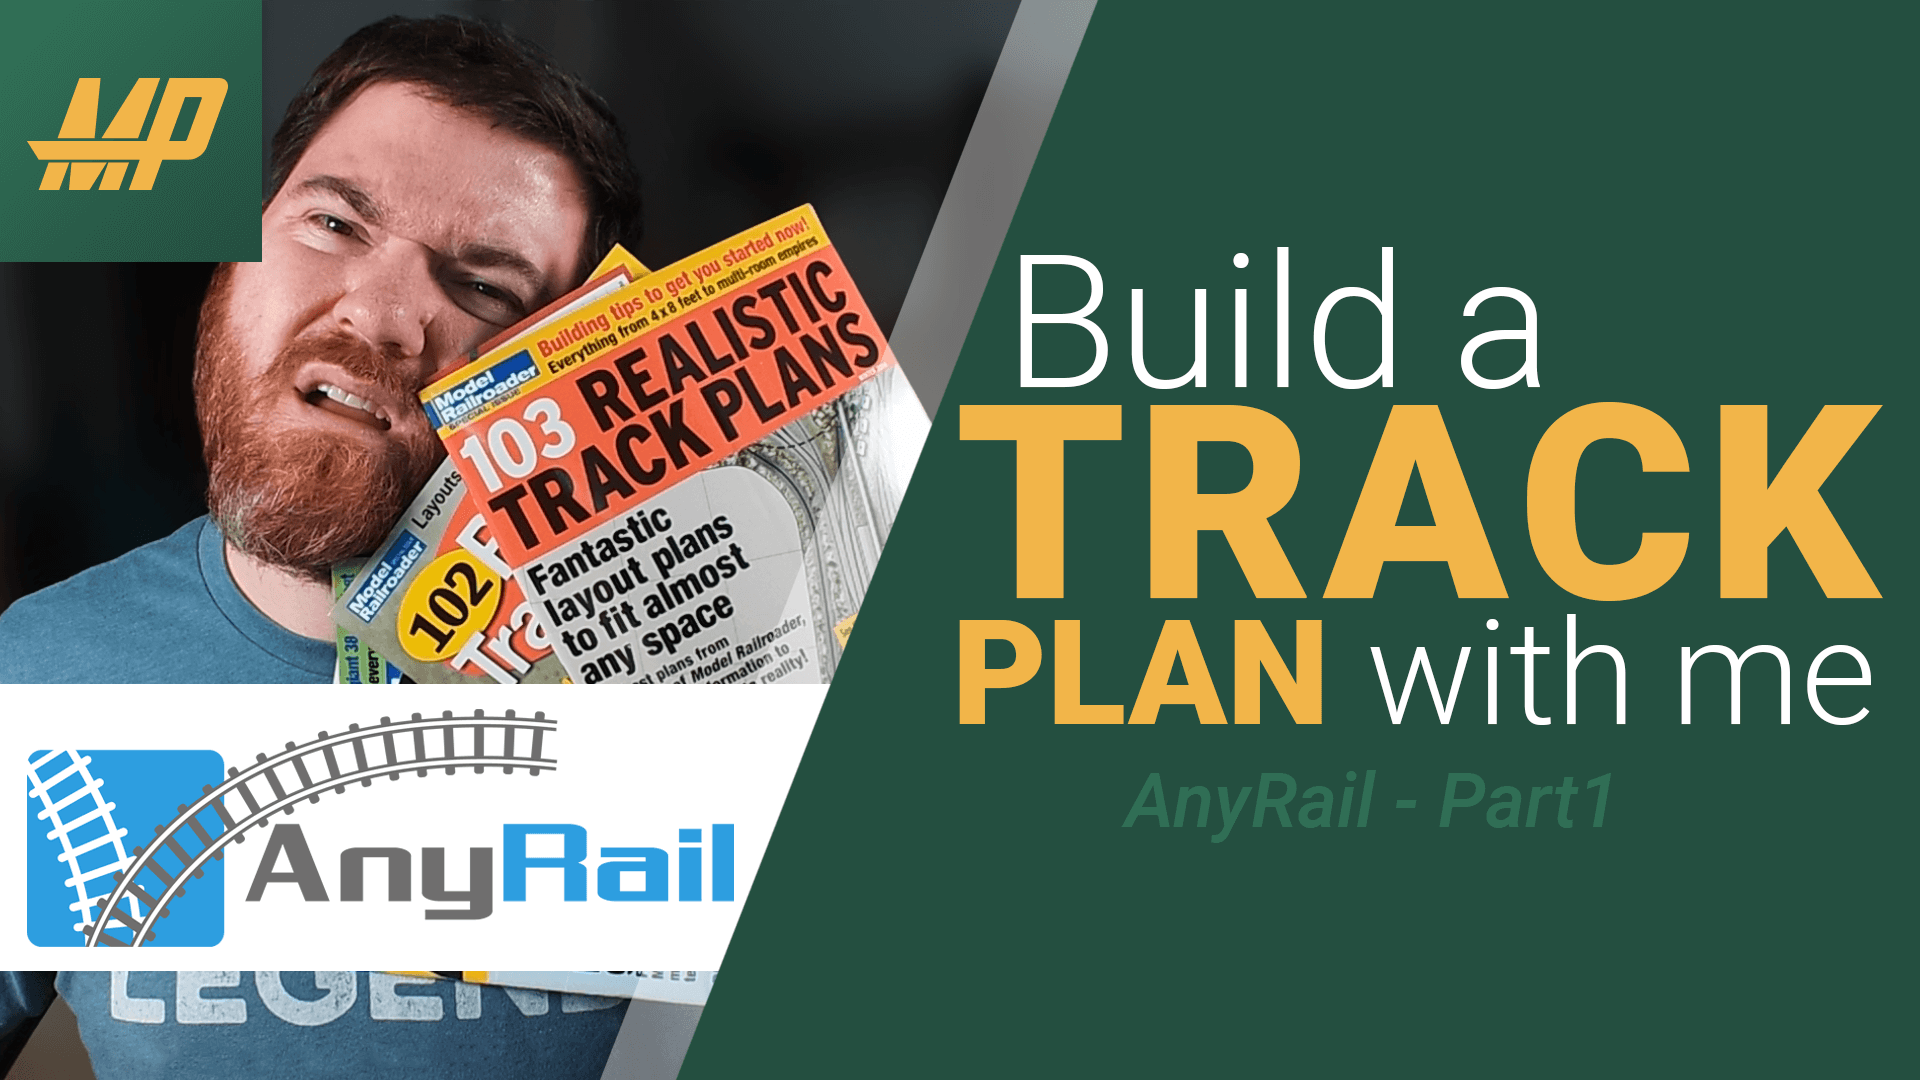 Let’s create a track plan for our HO Scale M&P Railway with Anyrail